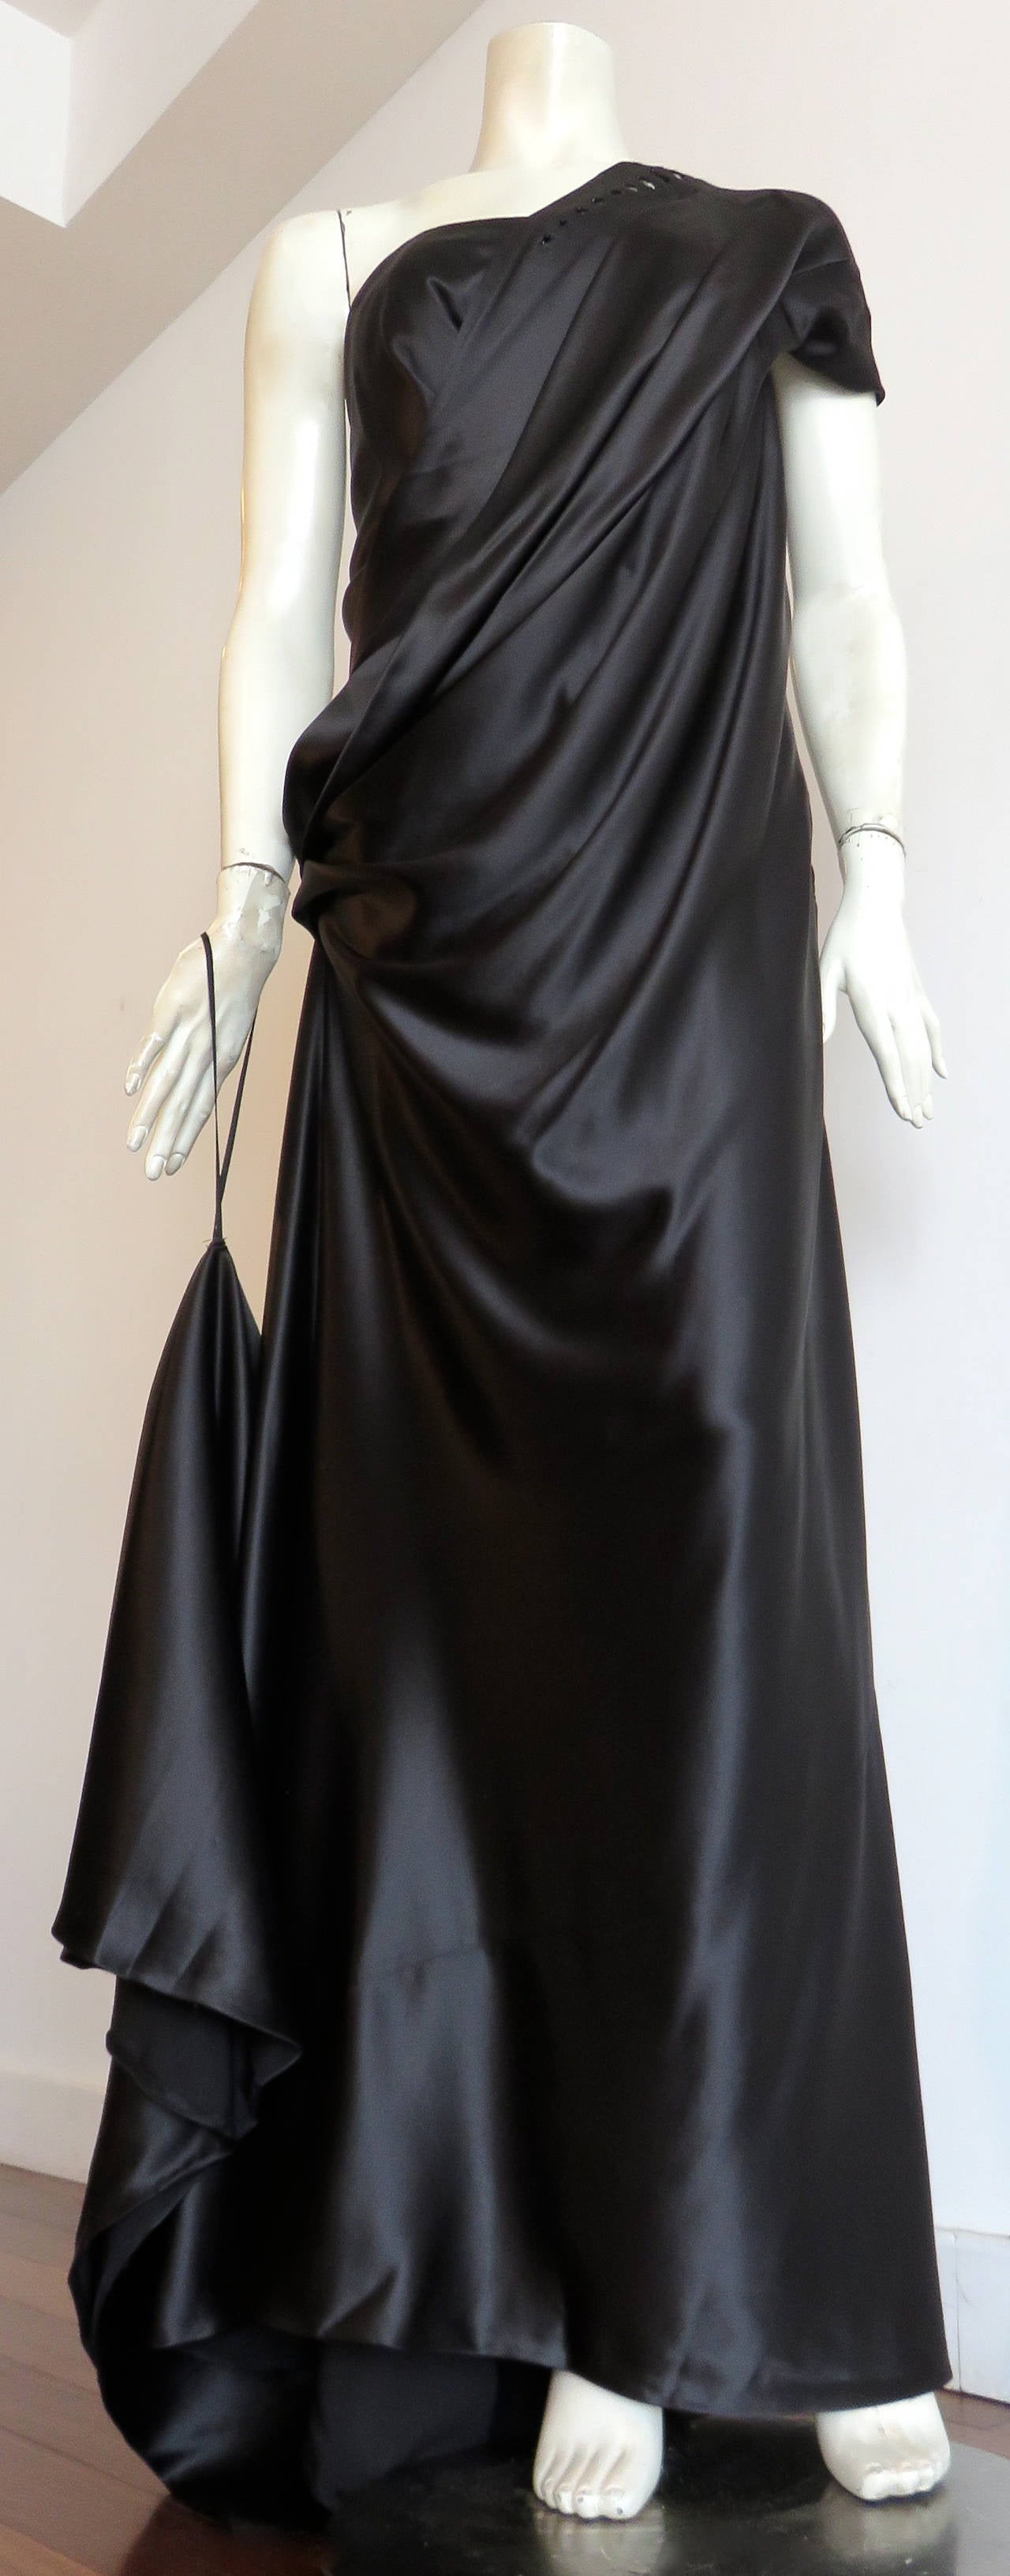 Worn once, and in excellent condition MARC JACOBS COLLECTION, black silk, charmeuse evening gown with train detail.

This stunning gown features square-shaped, cut-out seaming with beaded inner corners at left front shoulder, and along the lower